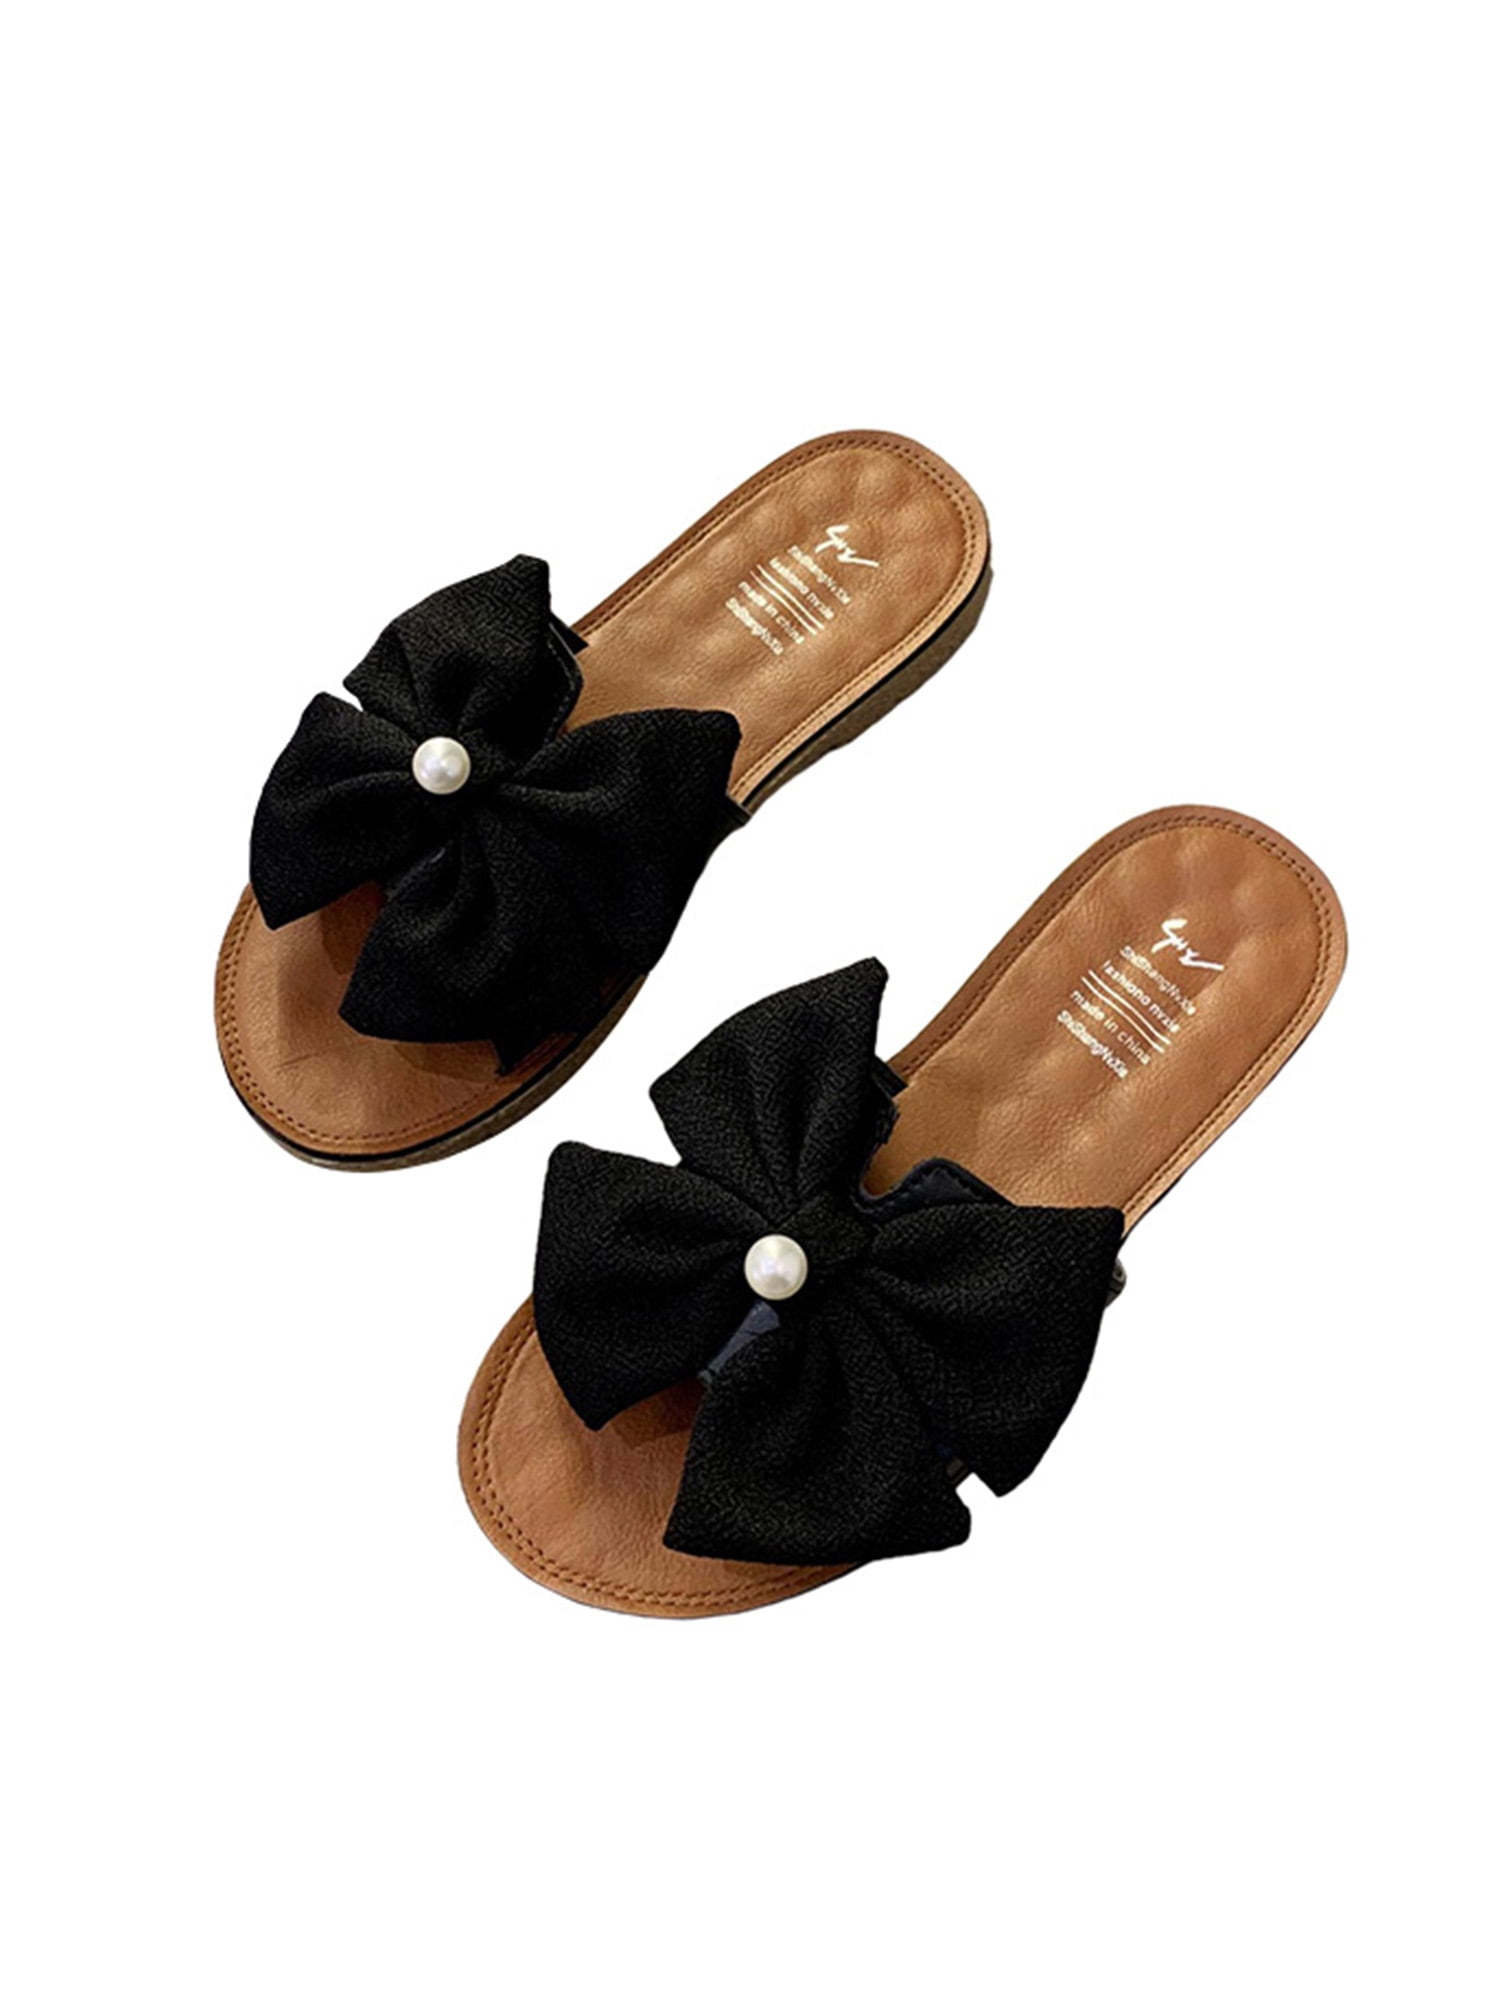 Womens Slip On Sandals Bow Flat Mule Summer Sliders Espadrille Shoes Sizes Hot